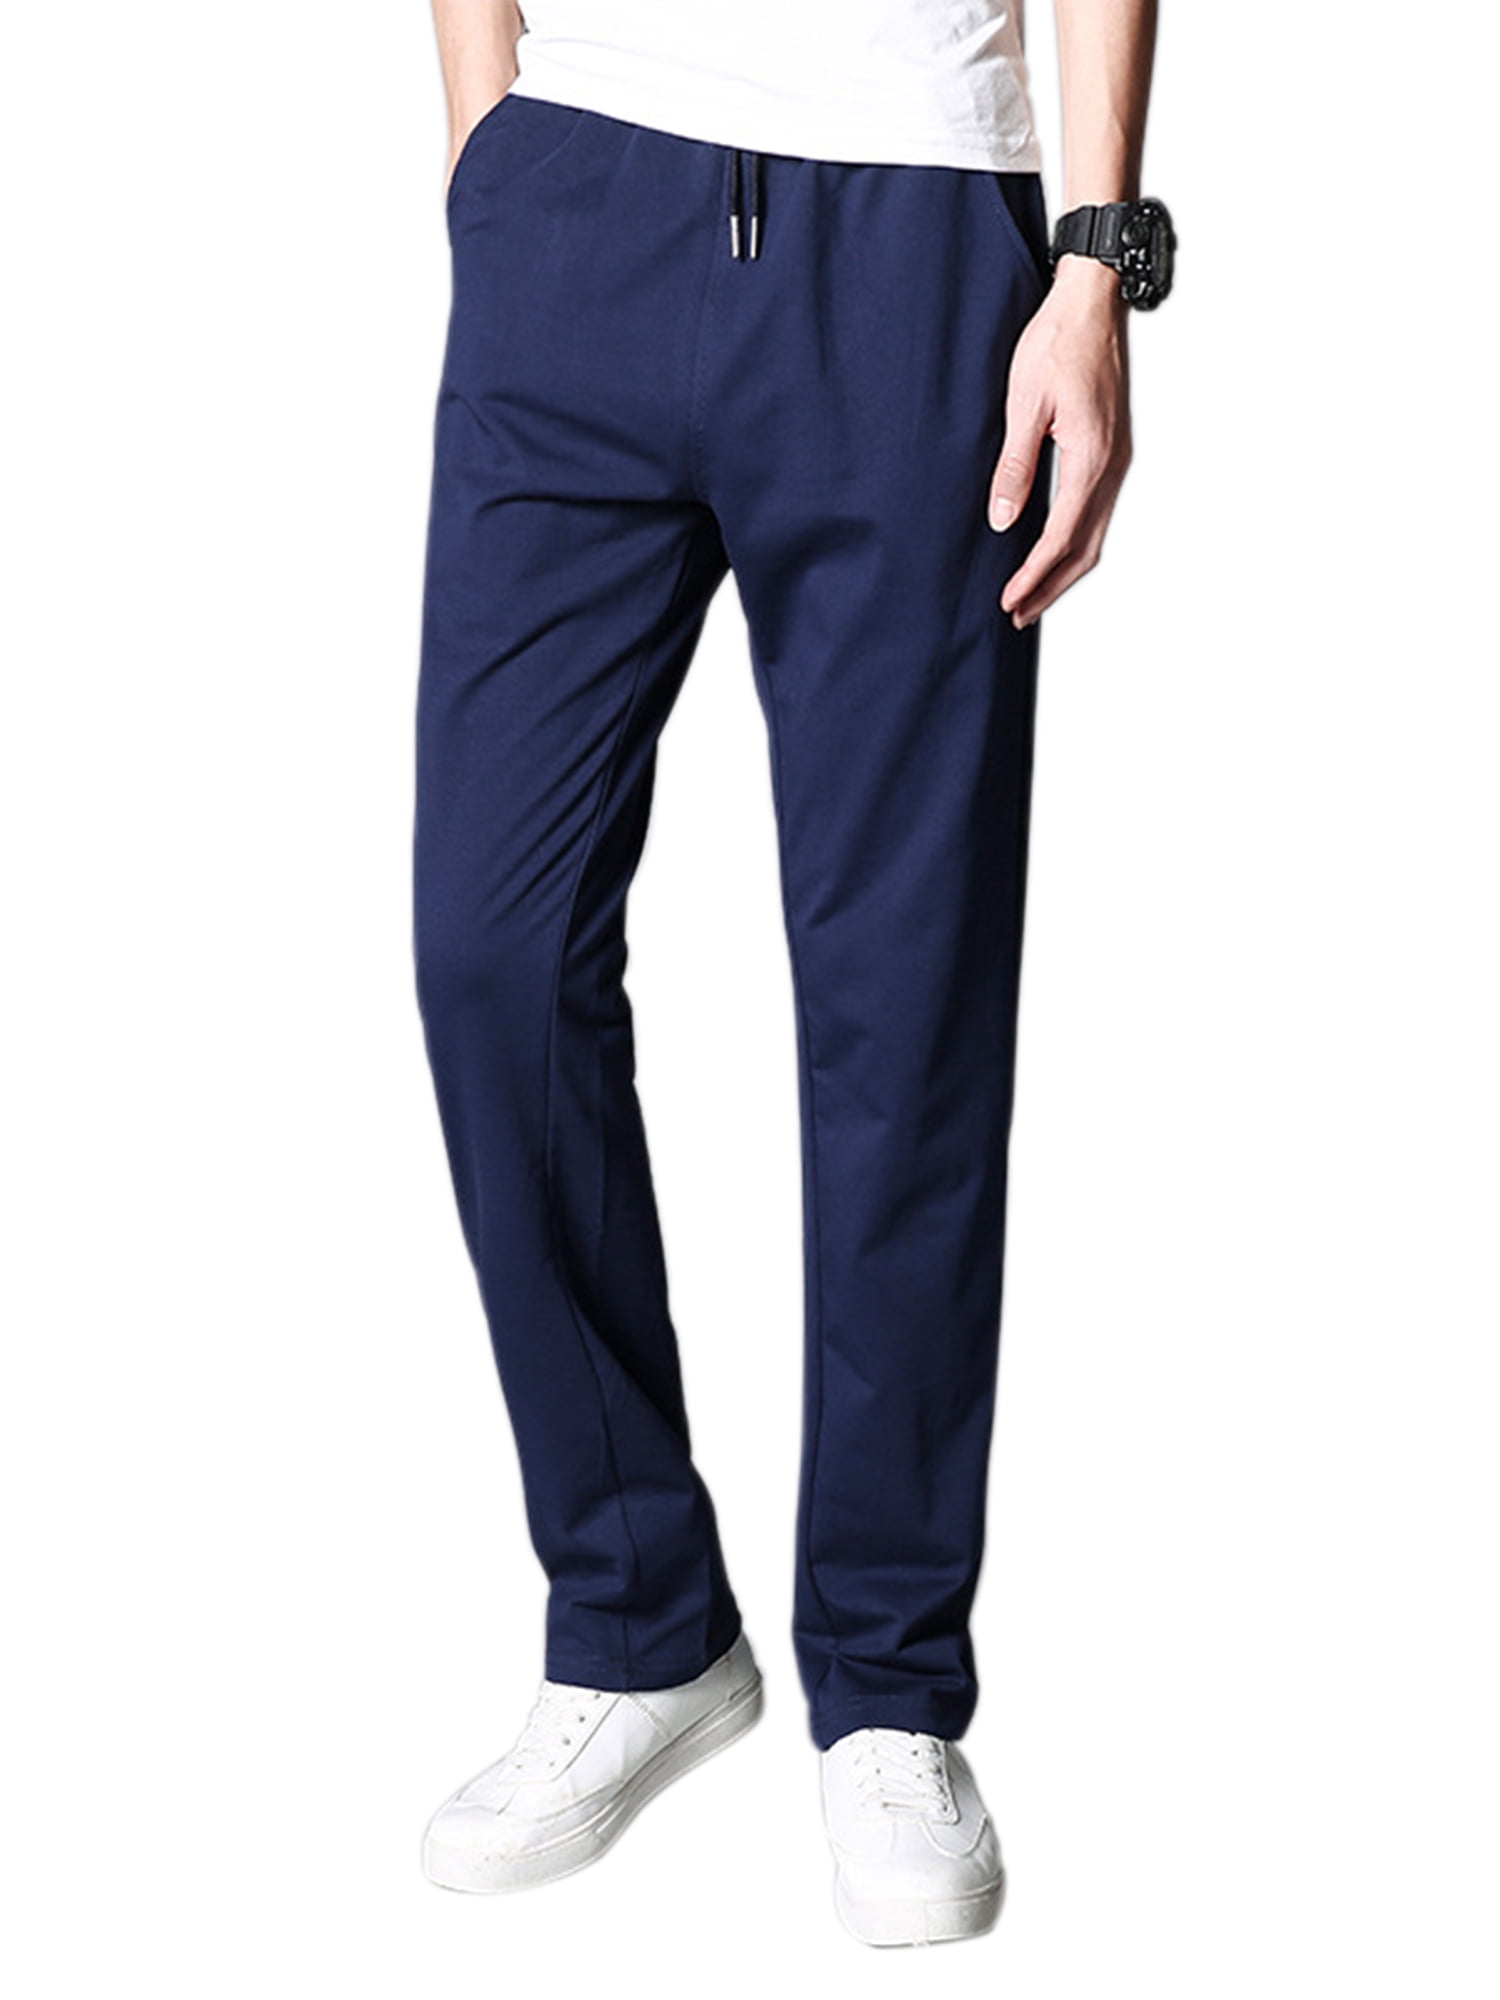 Running Workout Mens Sweatpants with Zipper Pockets Plus Size for Jogging